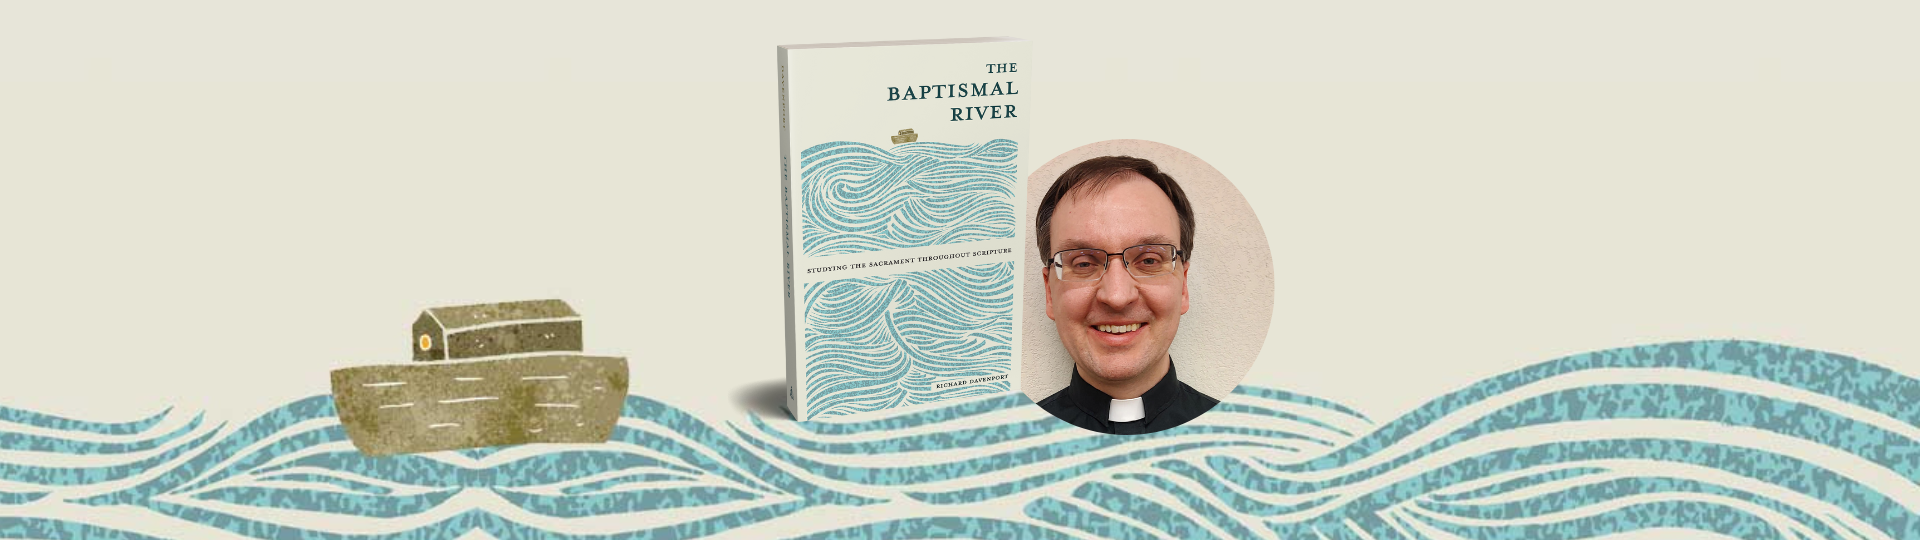 Press Release: Discover God’s Purpose for Baptism throughout Scripture